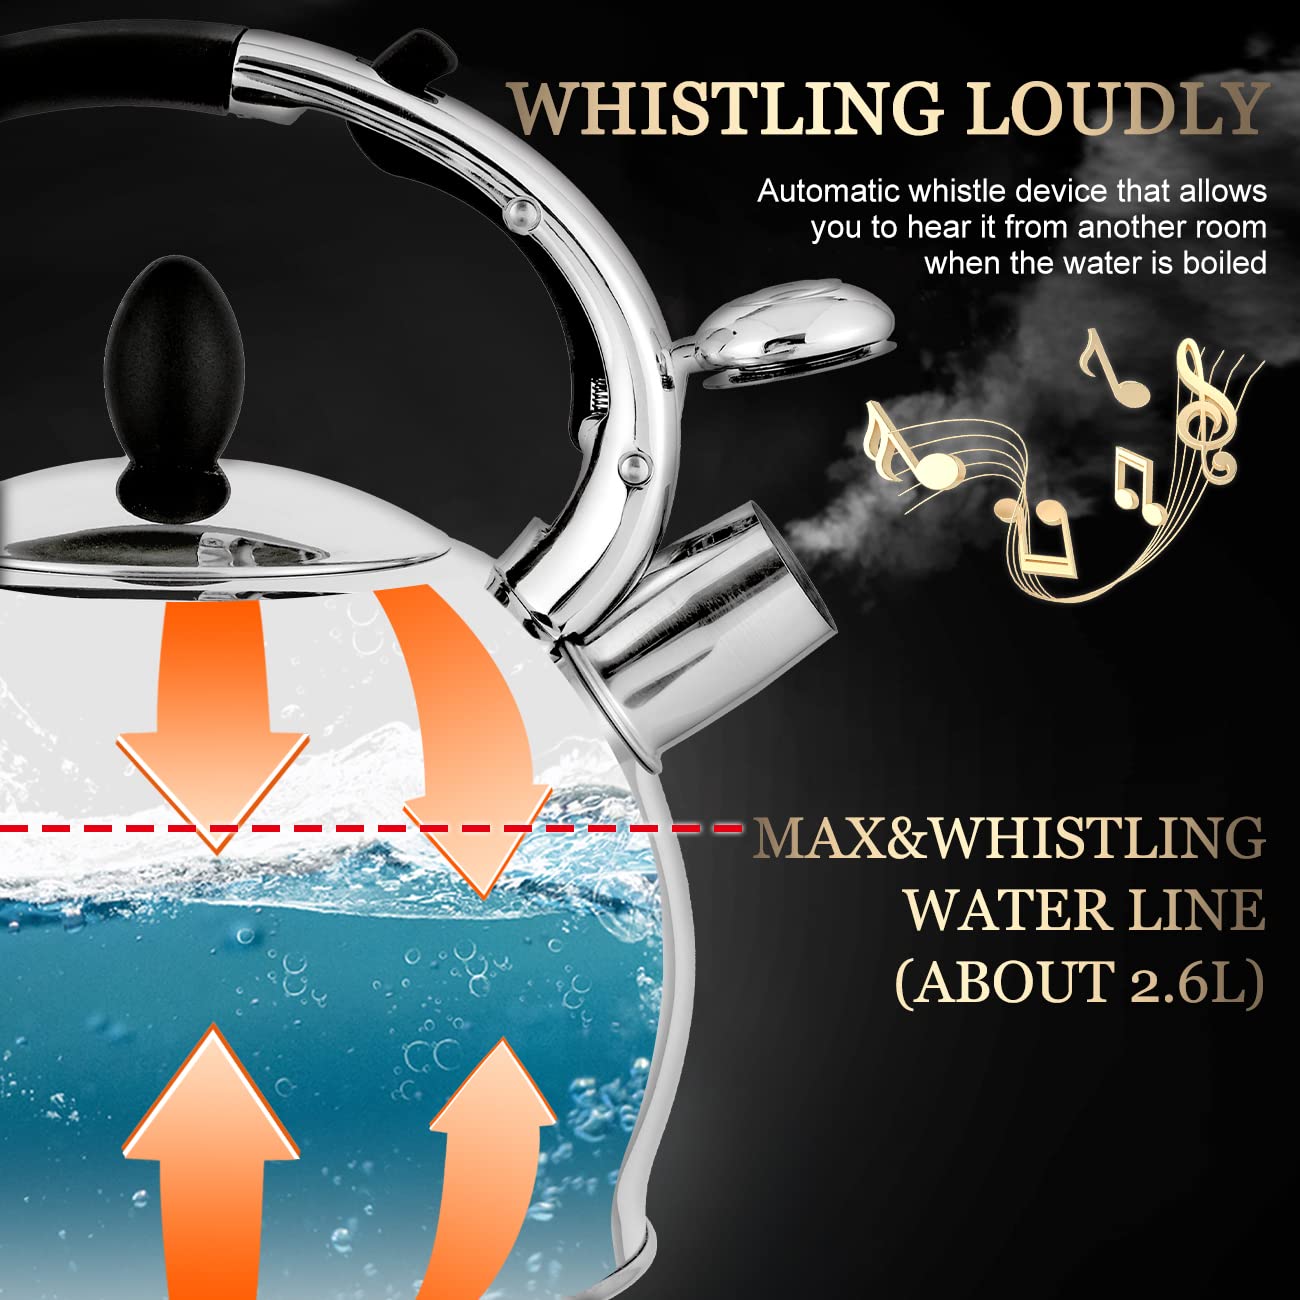 2.64 Quart Surgical Stainless Steel Stove Top Whistle Tea Kettle (Silver)